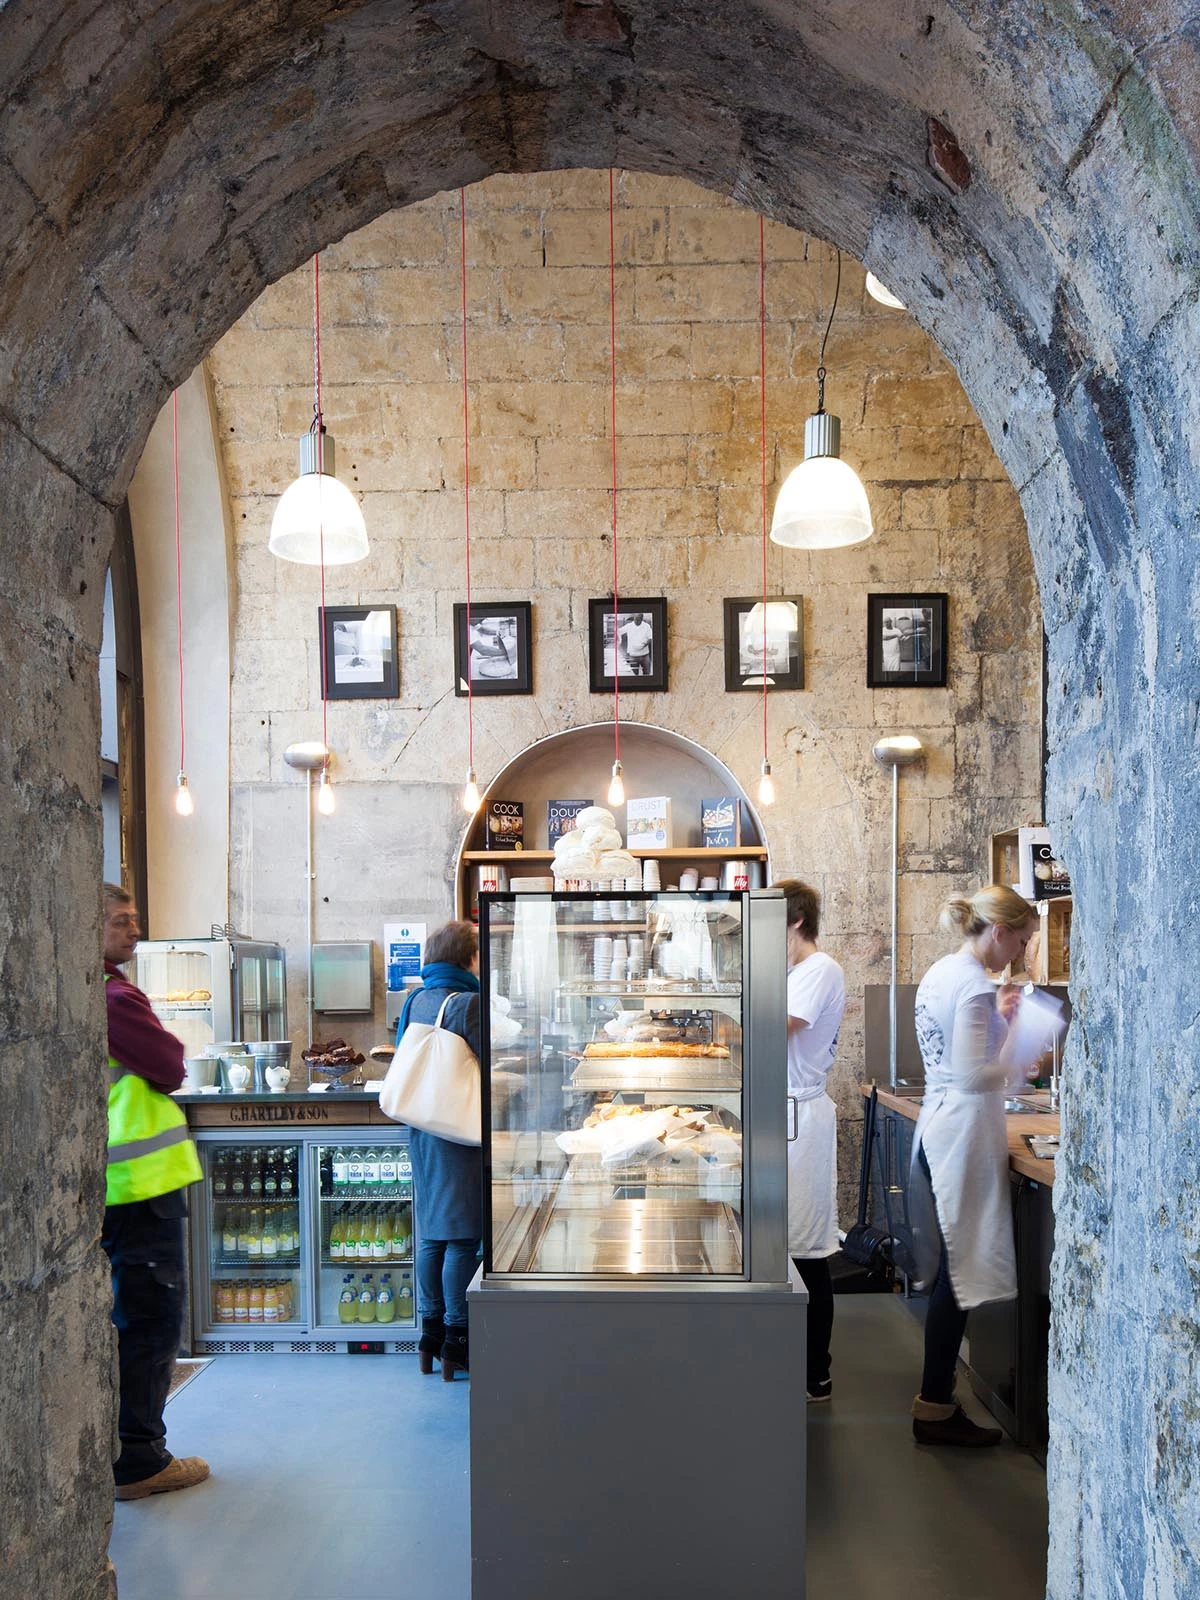 Interior View of Bakery Inside Railway Arch